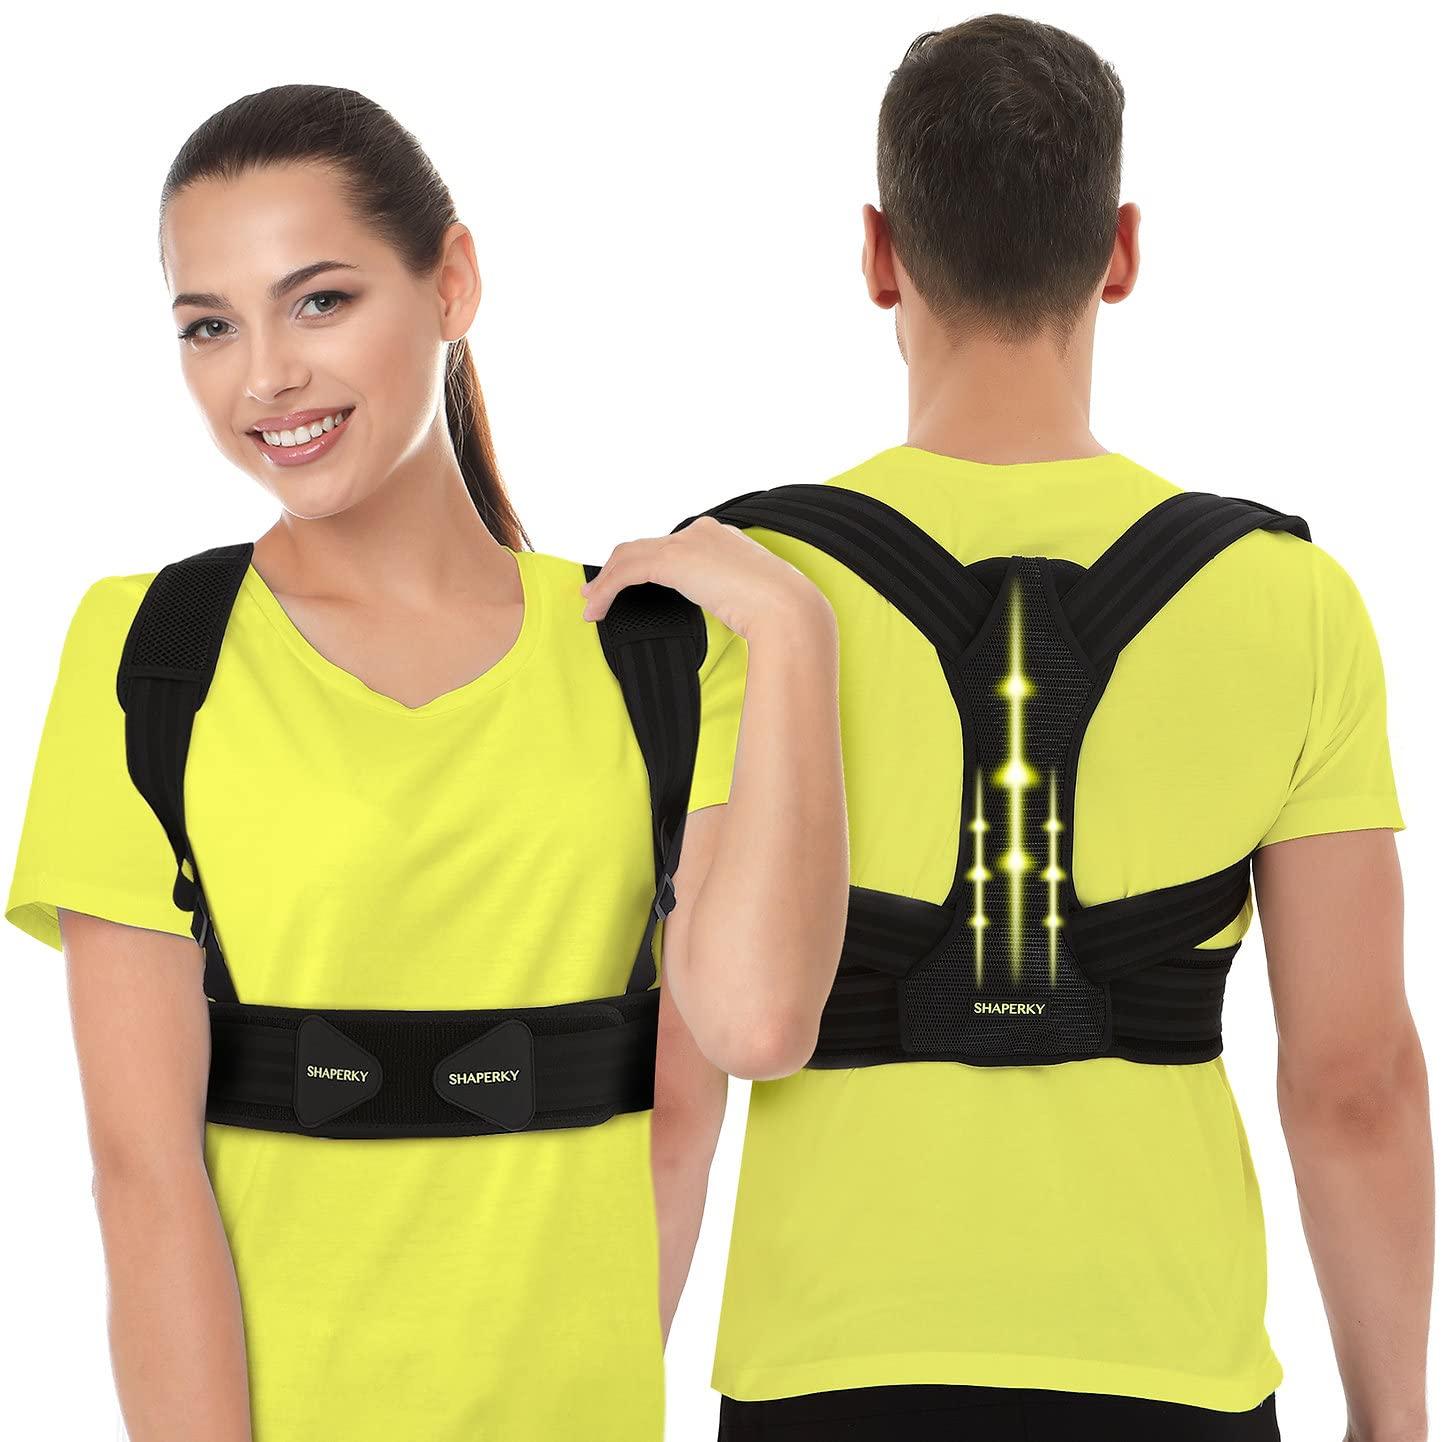 Back Brace Posture Corrector Back Braces for Upper and Lower Back Pain  Relief